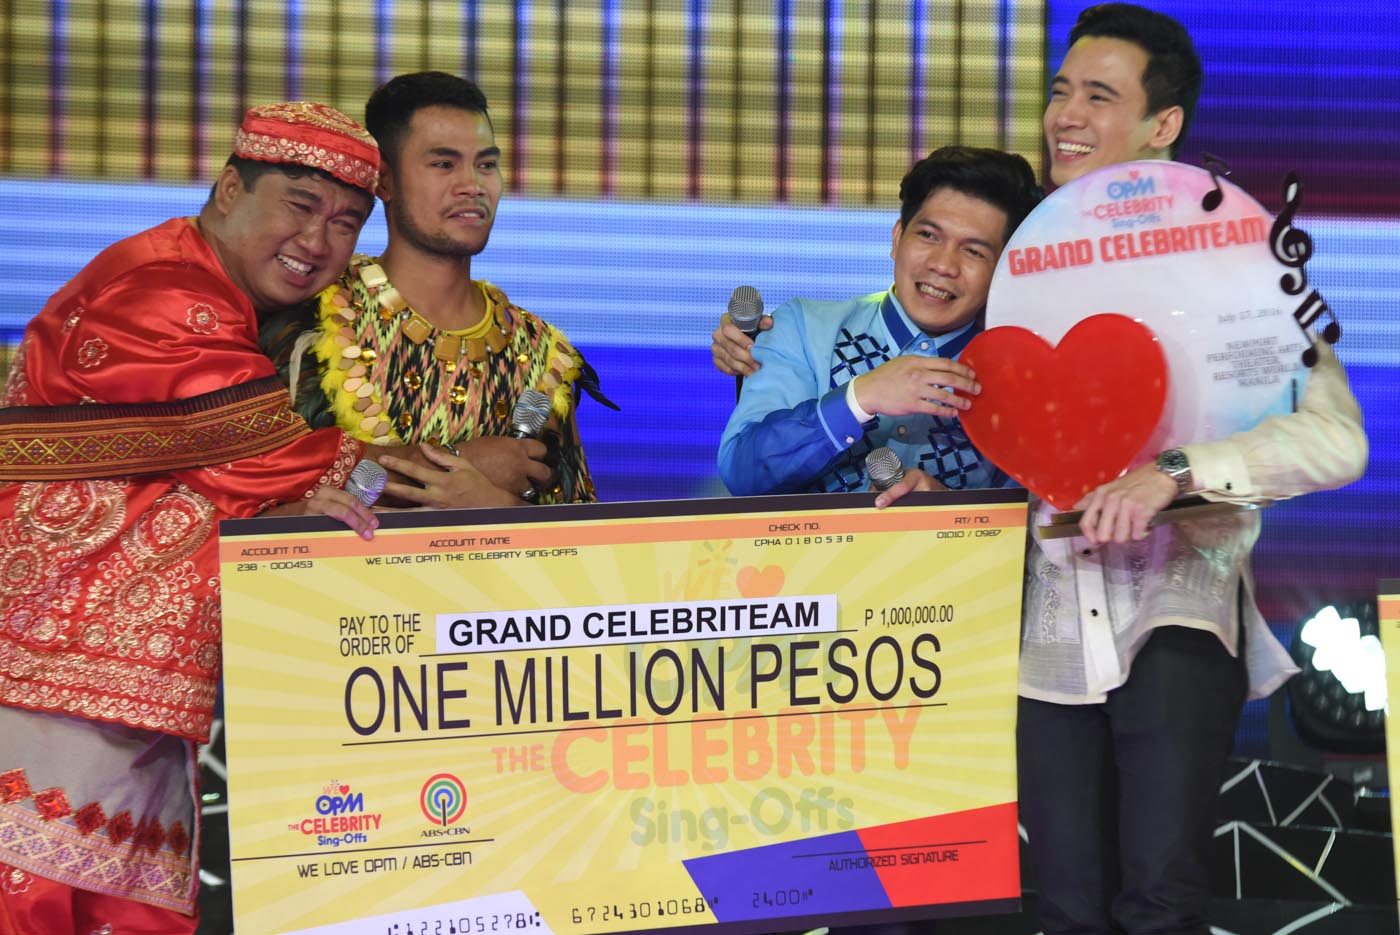 Tres Kantos wins ‘We Love OPM: The Celebrity Sing-Offs’